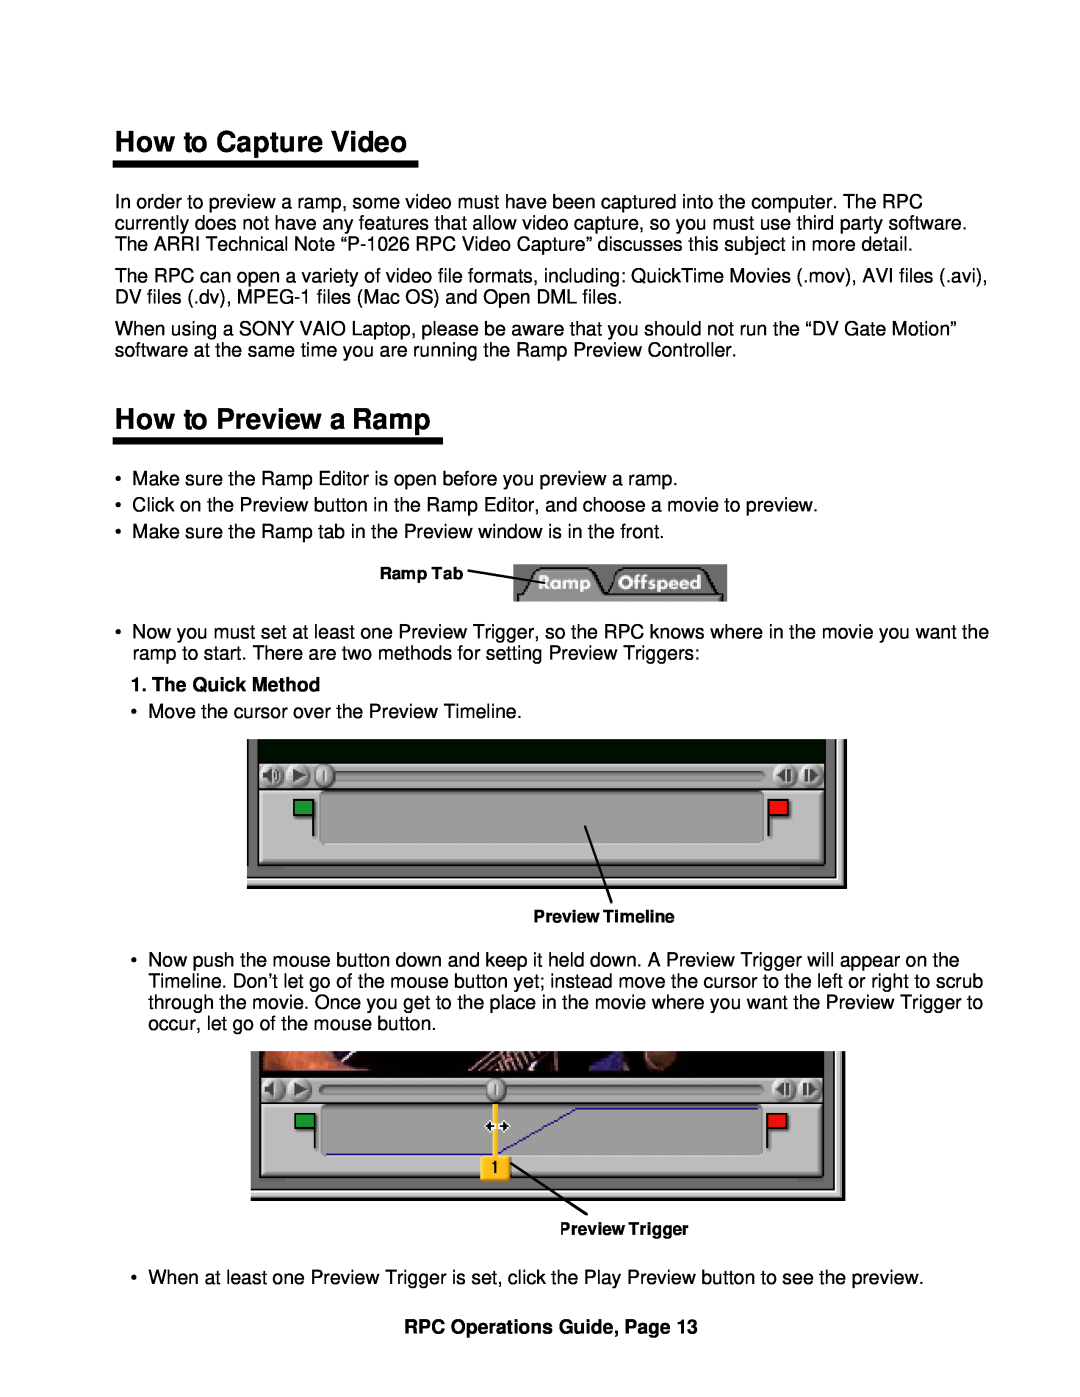 ARRI ARRI Ramp Preview Controller manual How to Capture Video, How to Preview a Ramp, The Quick Method 